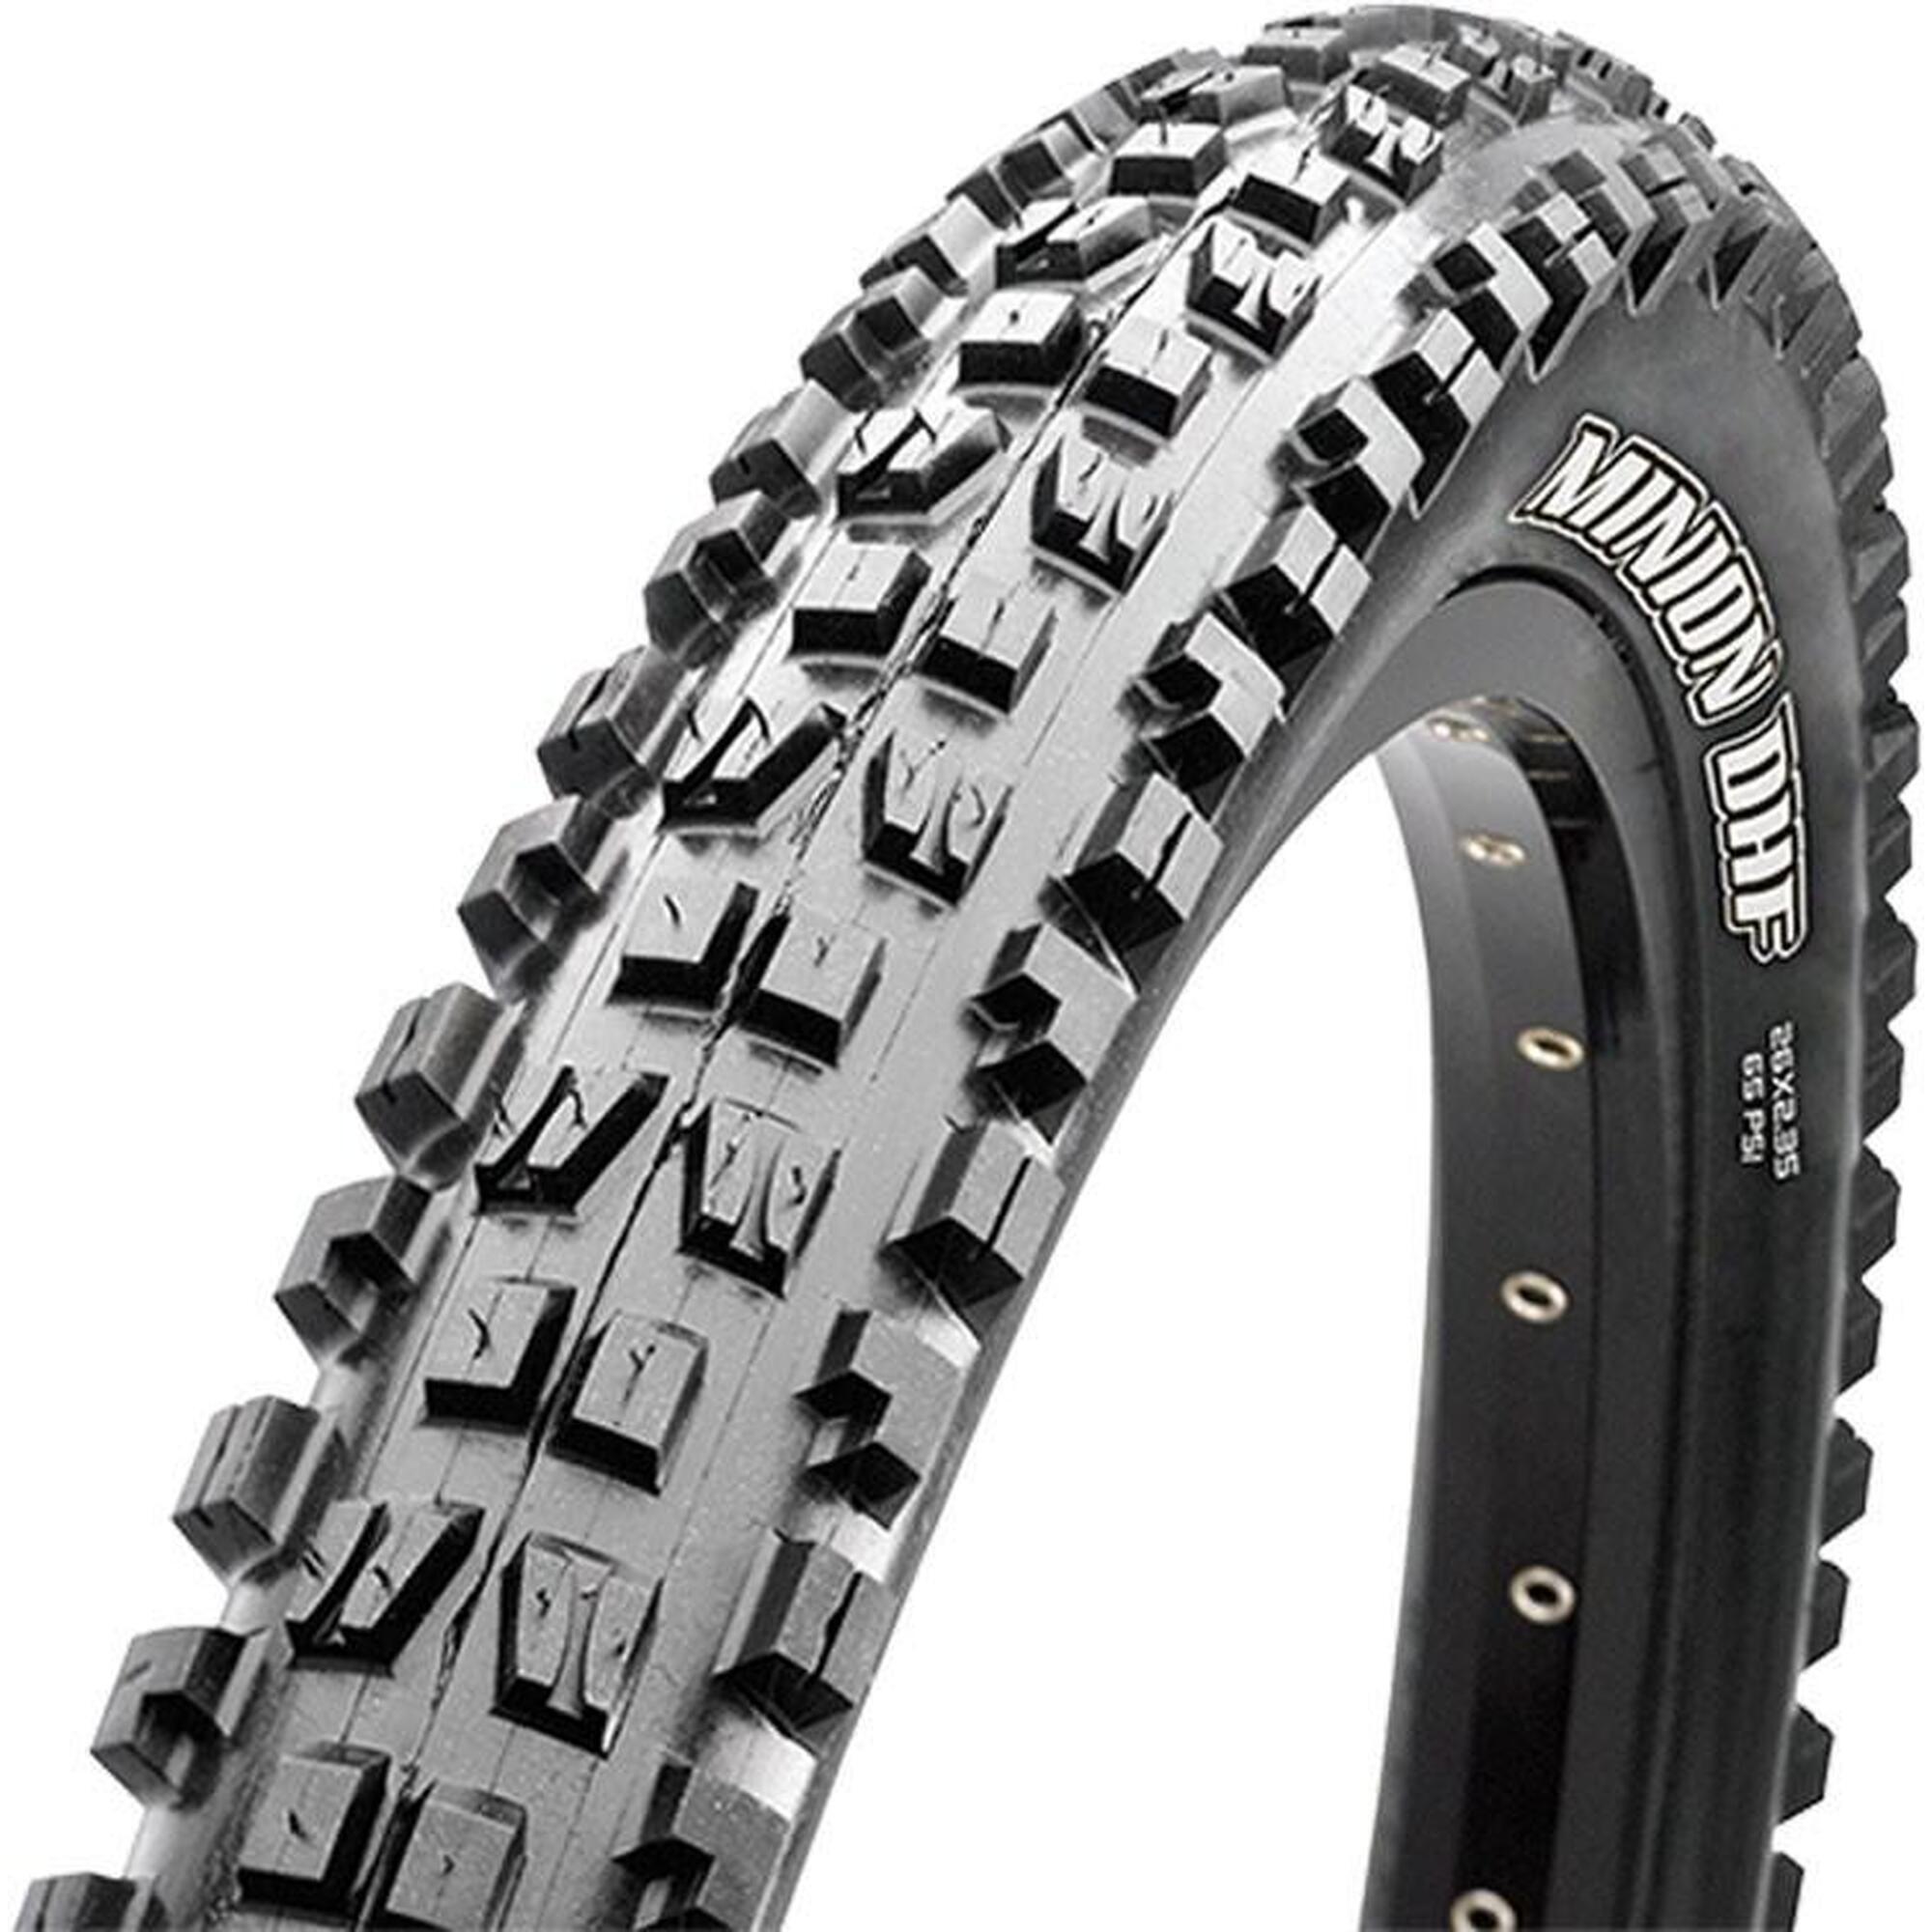 Minion DHF Exo+ vouwband - 27.5x2.50